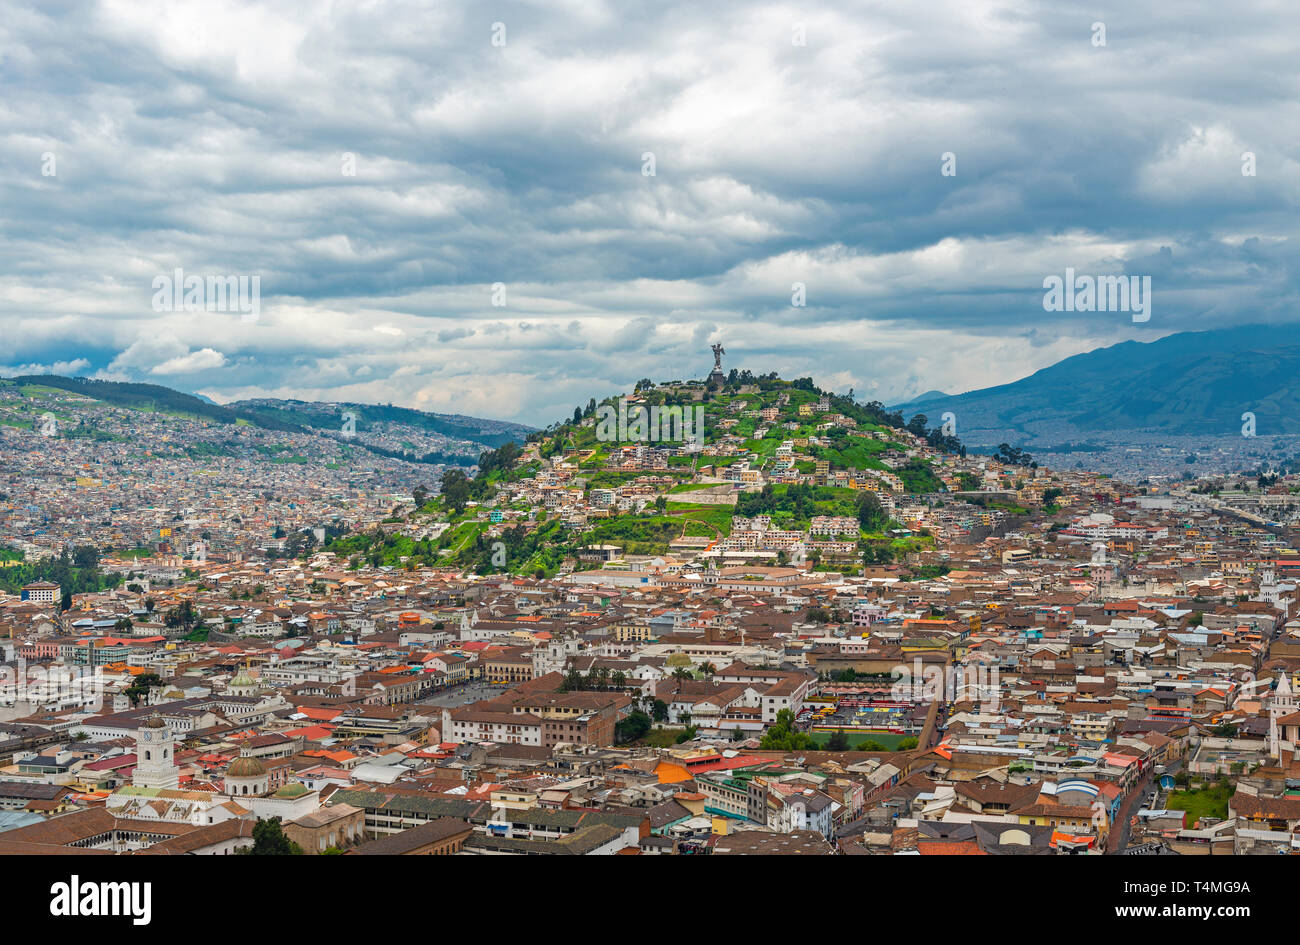 The historic city center of Quito in the Andes mountain range with the Panecillo hill and Virgin of Quito and a dramatic cloudy sky, Ecuador. Stock Photo